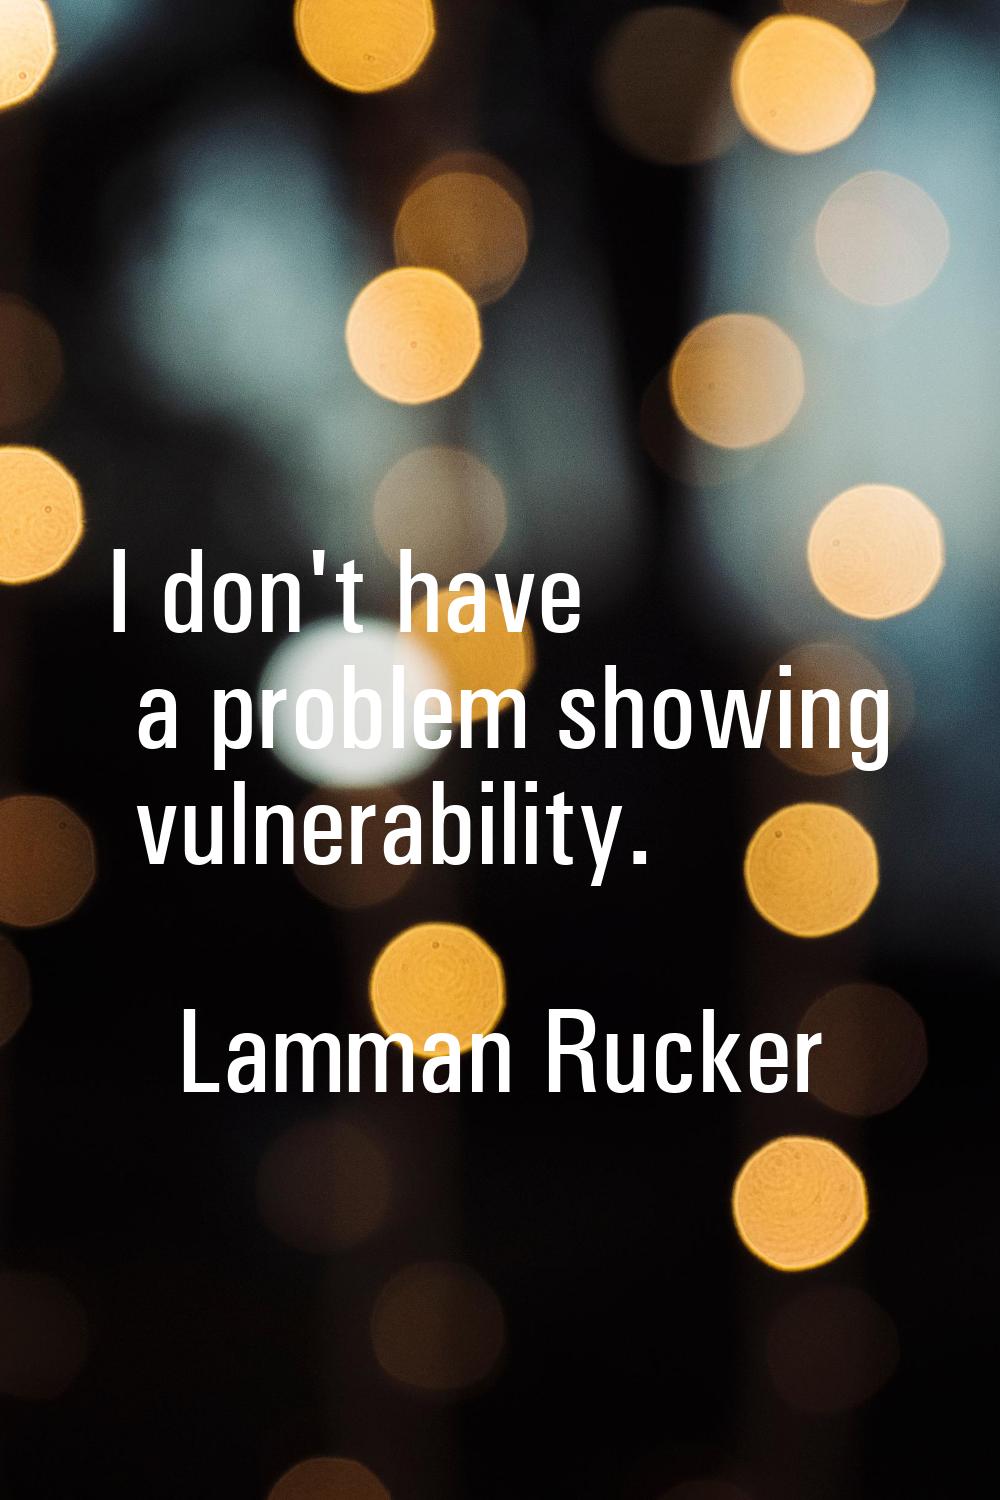 I don't have a problem showing vulnerability.